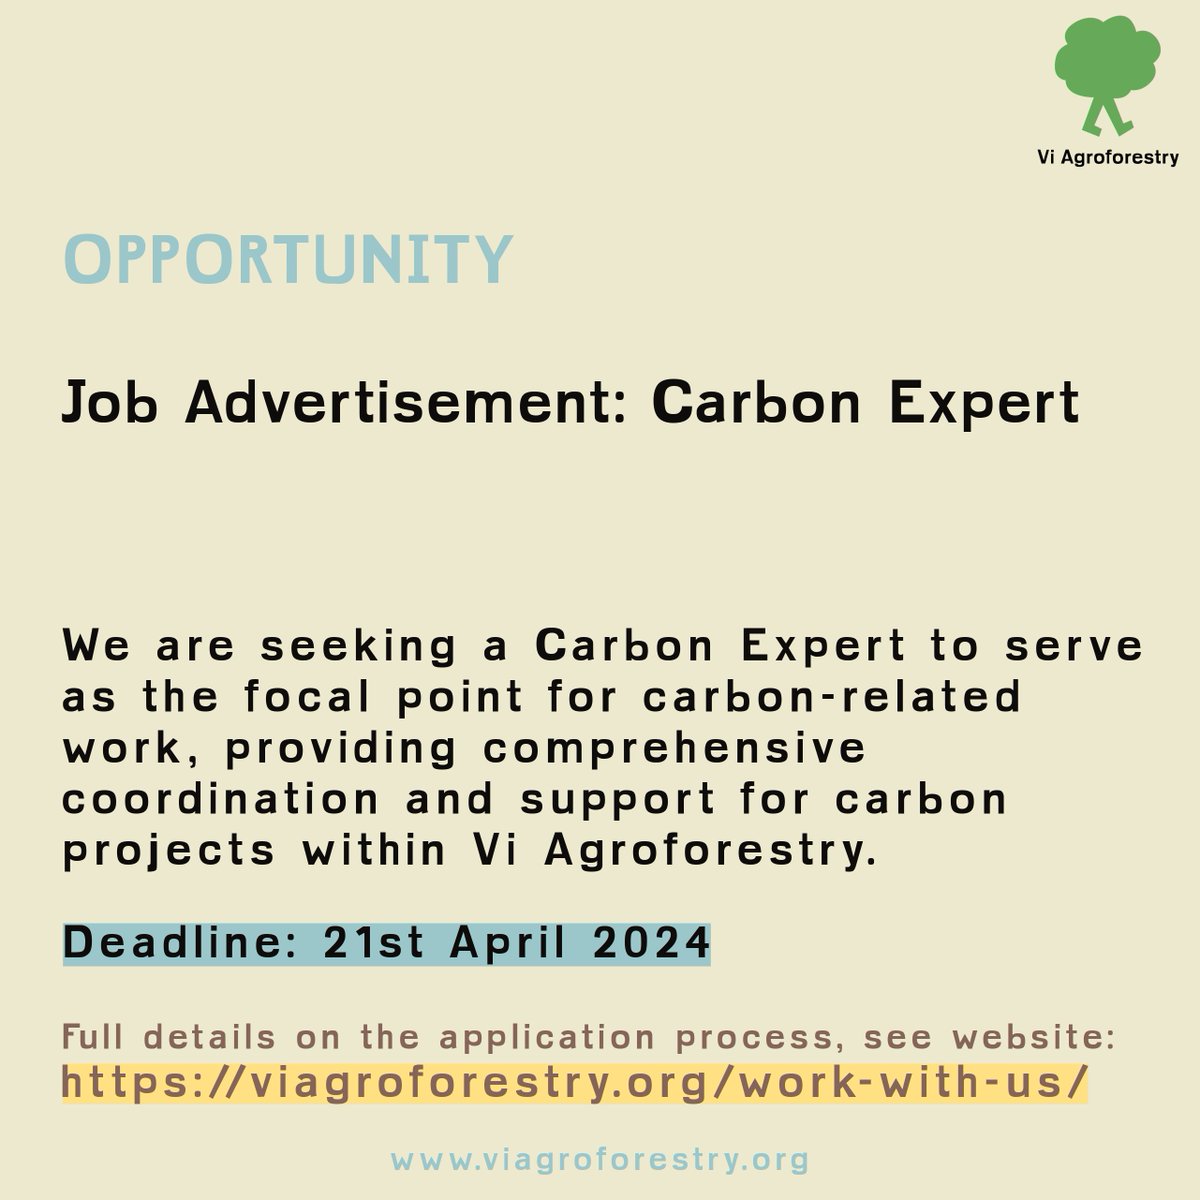 ❗Reminder: 🌍 Vi Agroforestry seeks a Carbon Expert in Nairobi. Empower smallholder farmers. 📷 Responsibilities: Coordinate carbon projects, manage verifications, and collaborate with country offices. 📷viagroforestry.org/work-with-us #JobOpening #CarbonExpert